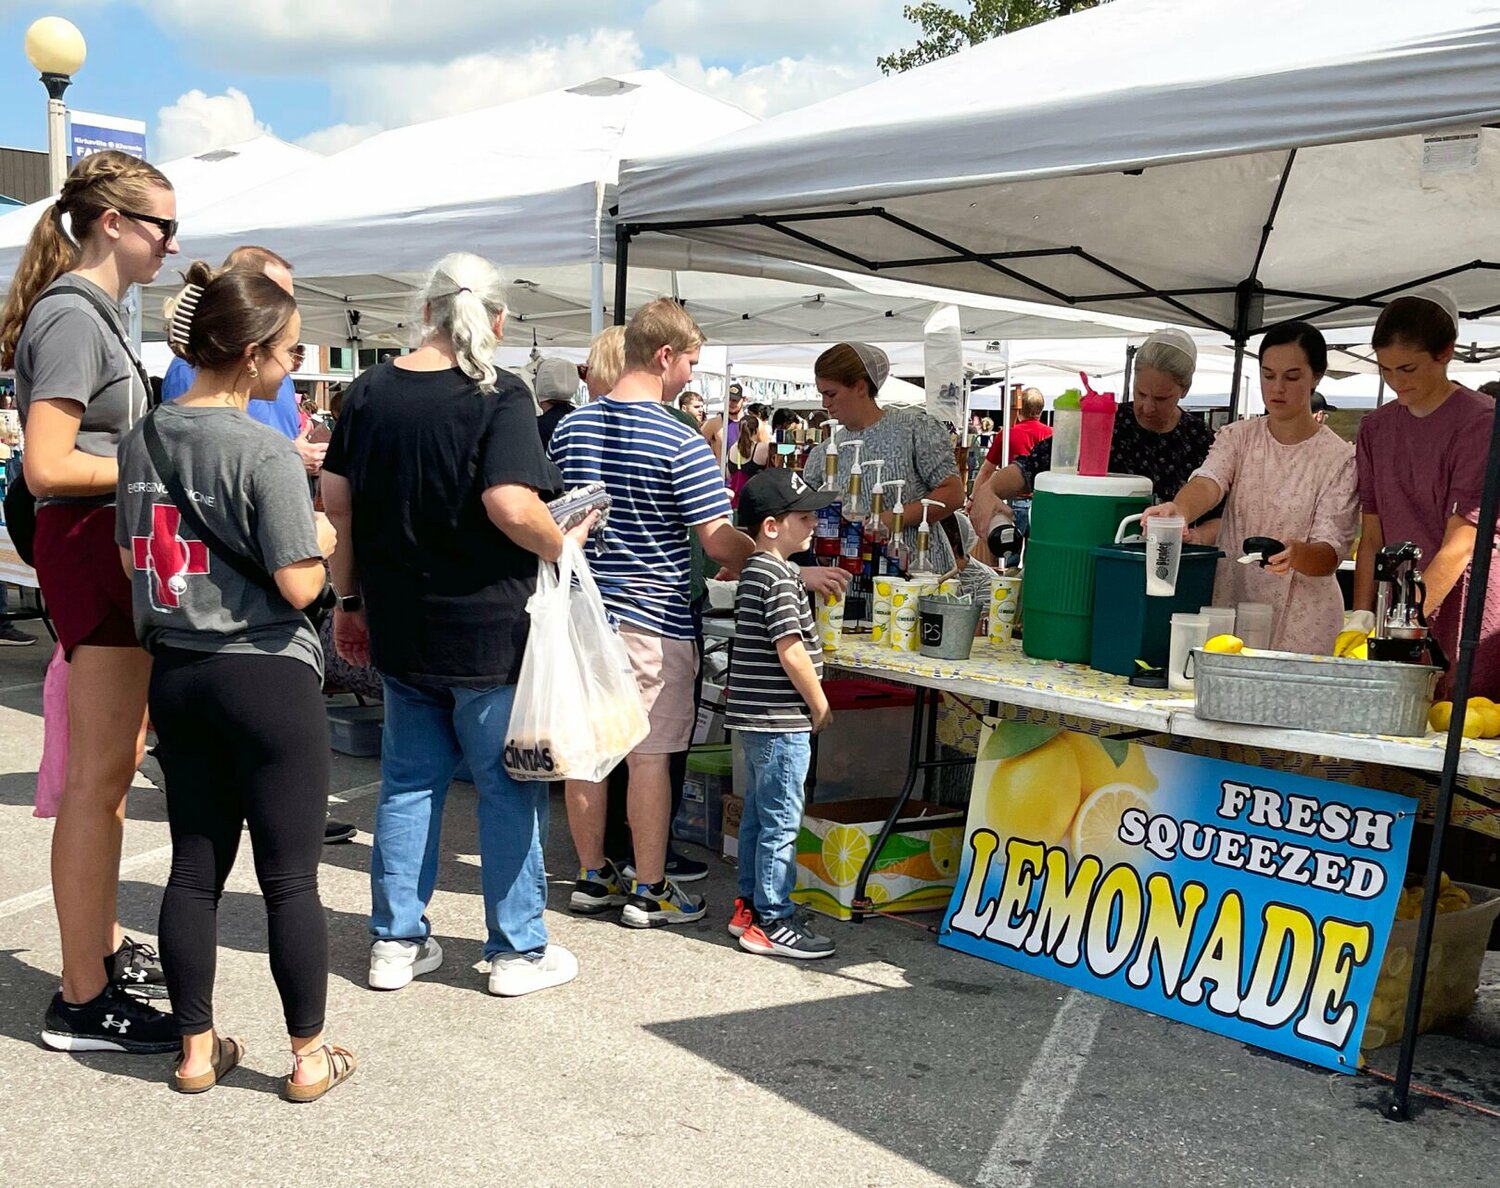 Fresh lemonade was served up at the Red Barn Arts and Crafts Festival.